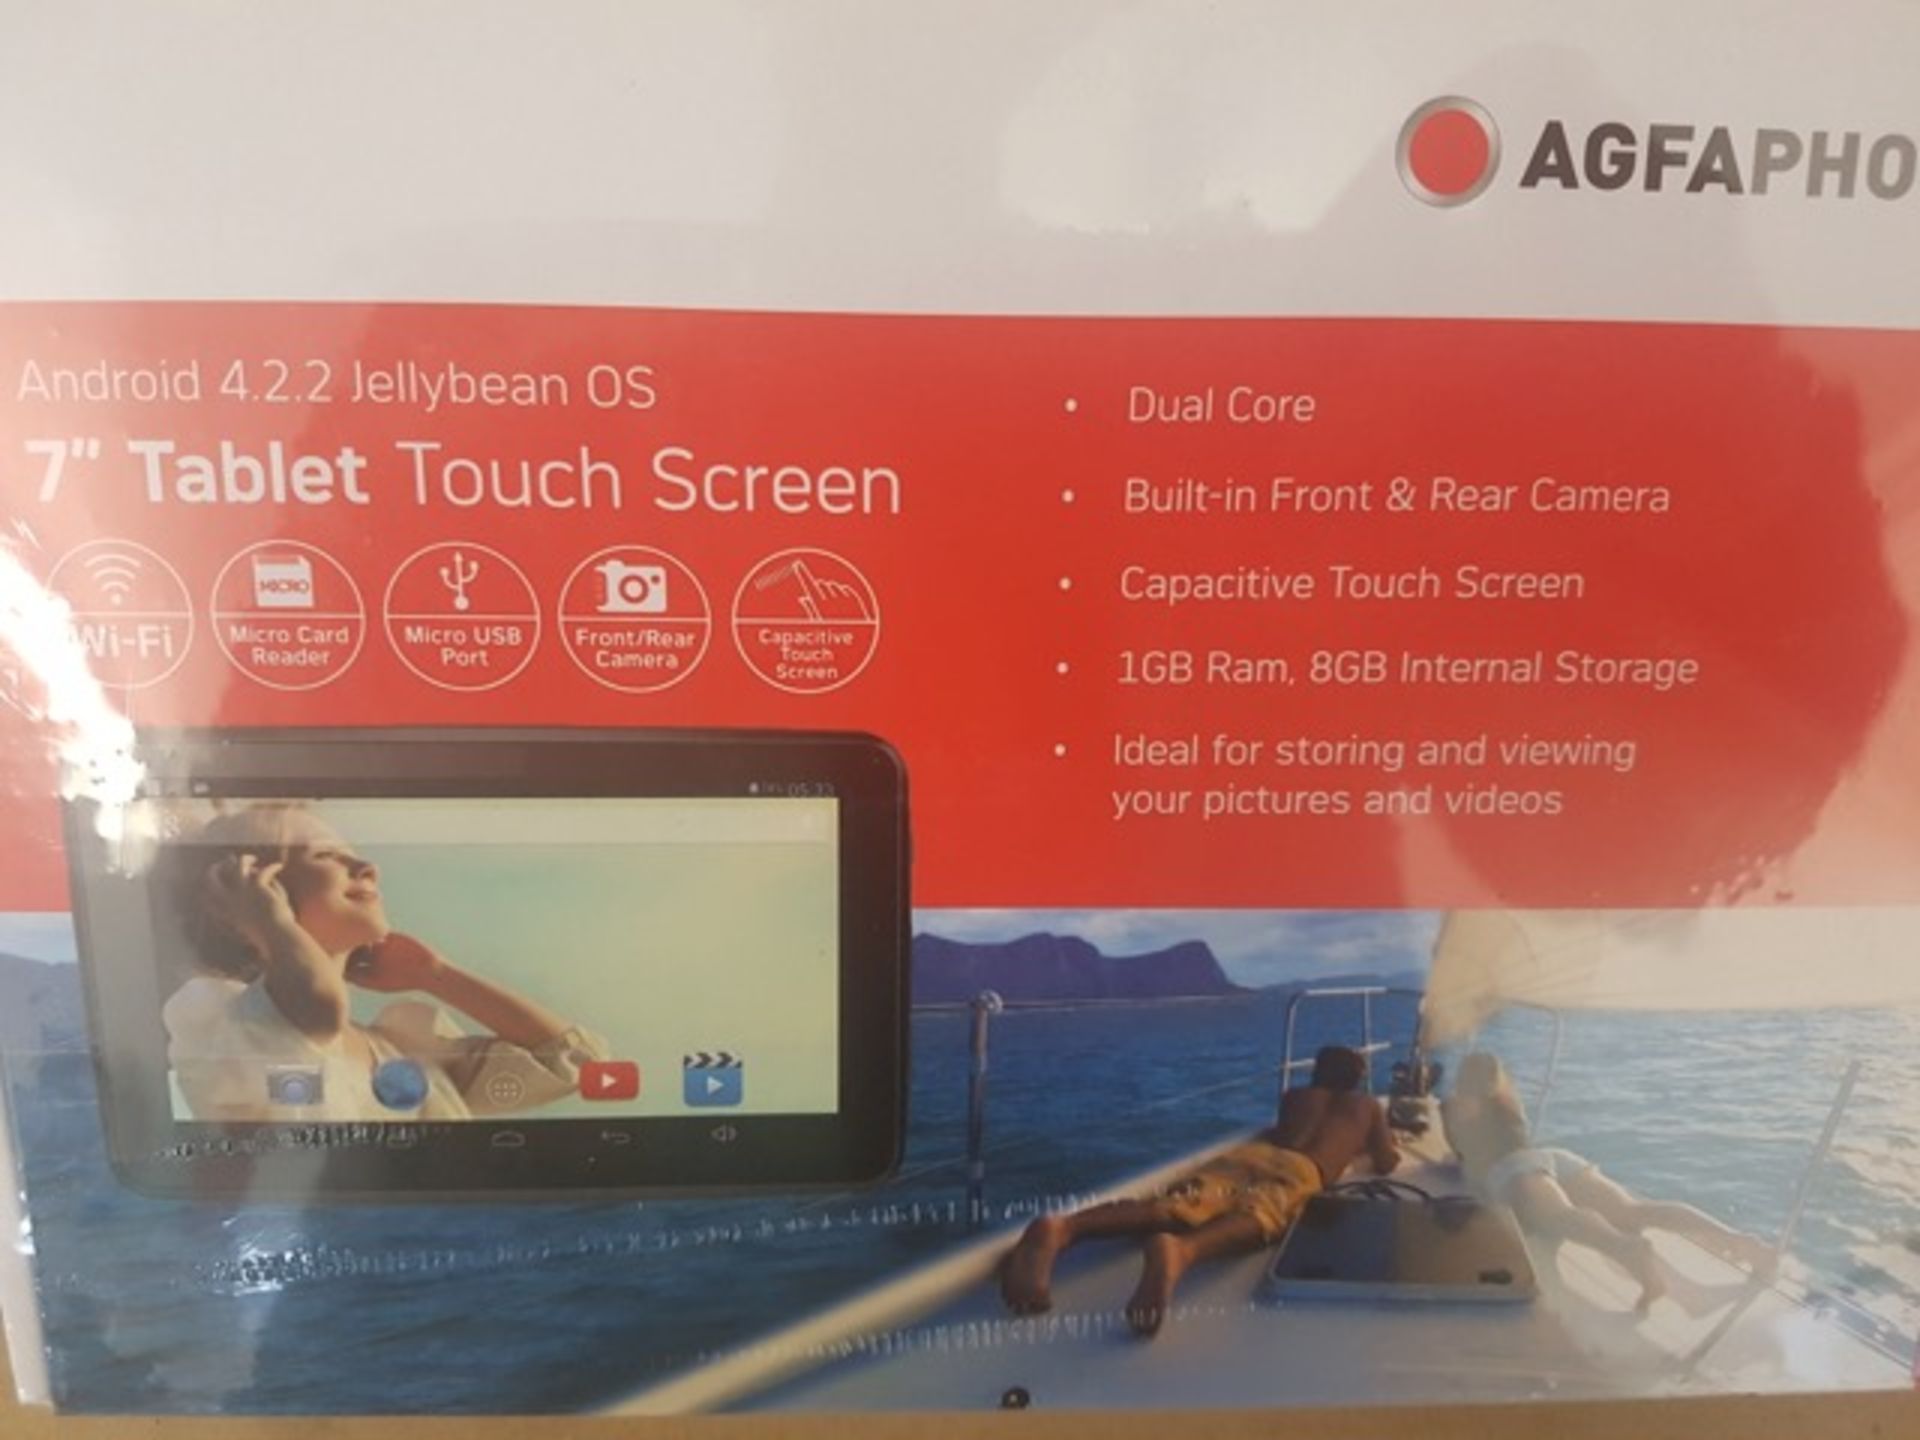 3 x Brand New Agfaphoto 7 Inch Tablet Touch Screen. Android 4.2.2 Jellybean OS. Dual Core, Built - Image 2 of 3